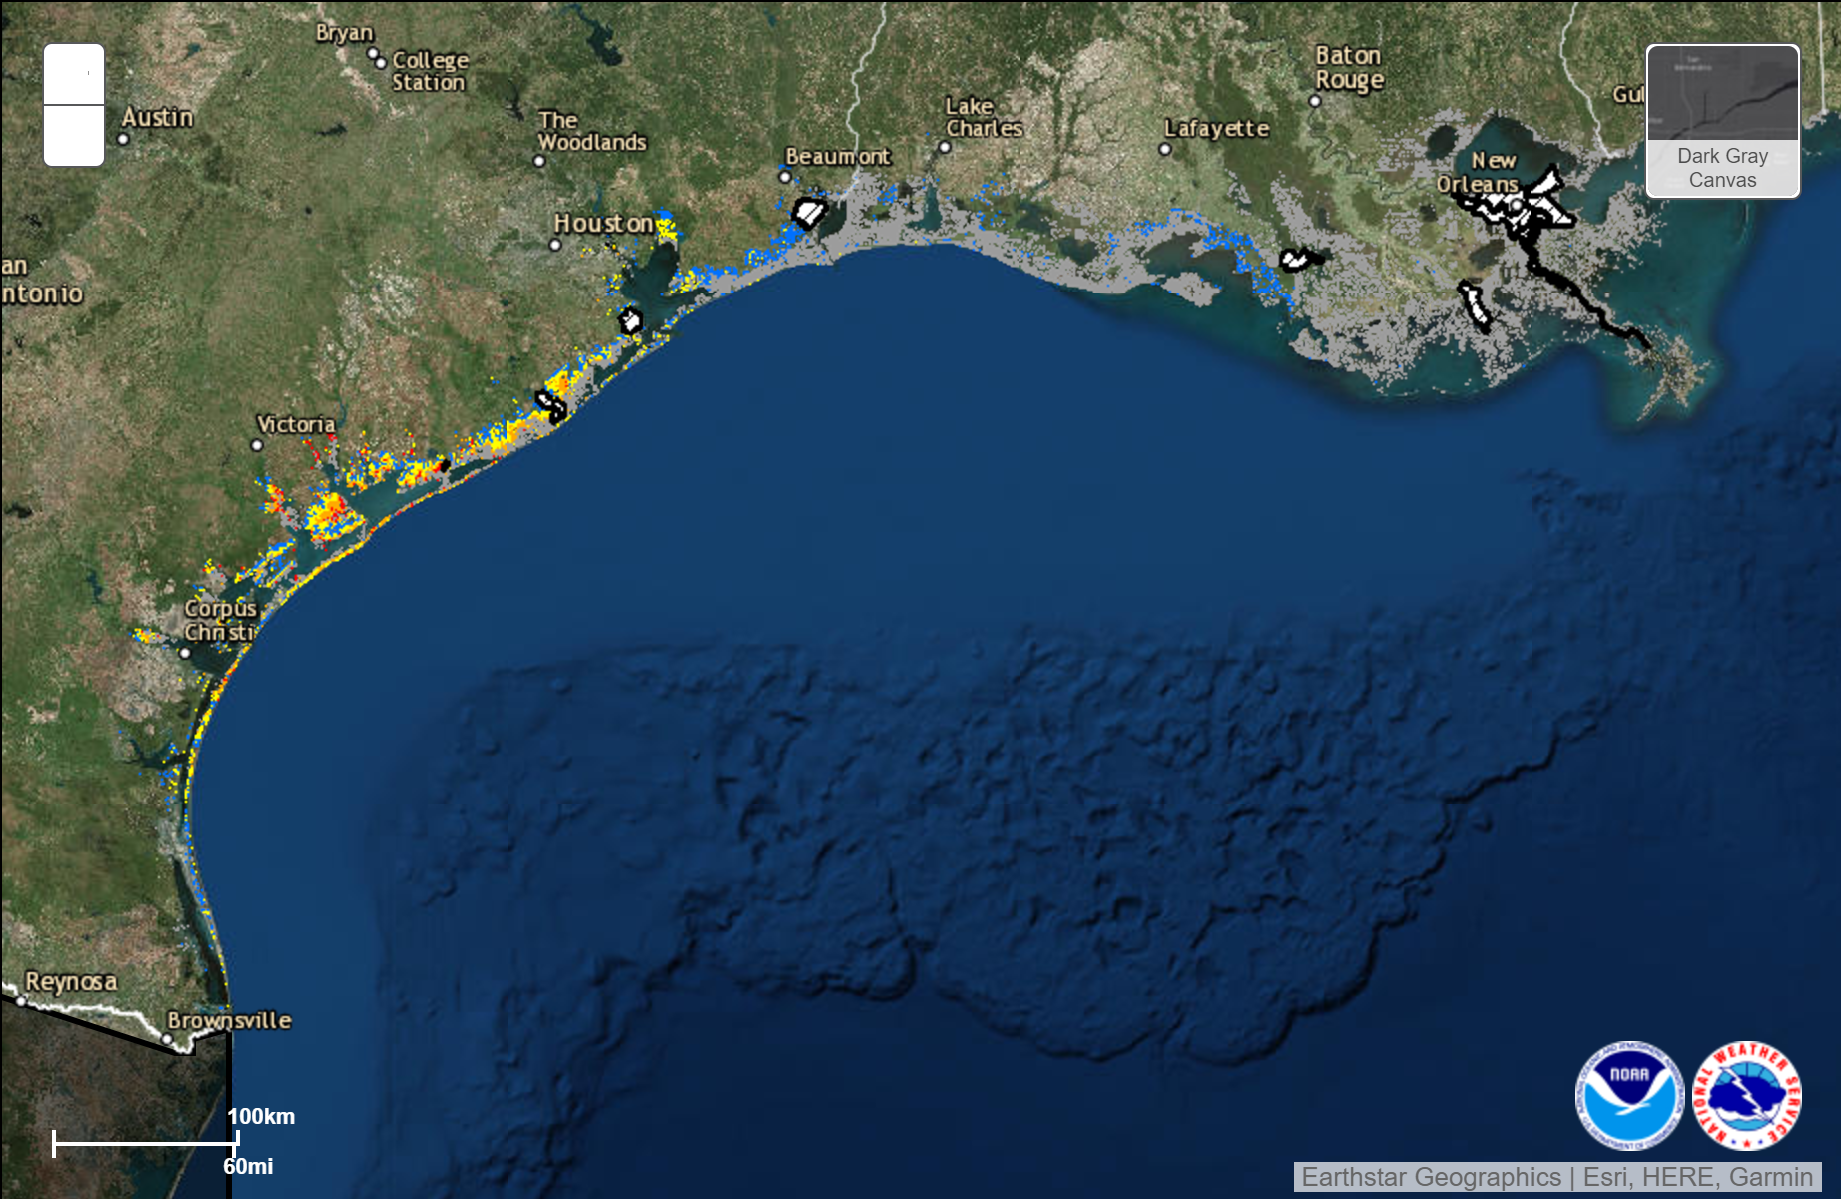 The storm surge inundation levels show the number of feet of storm surge that can be expected along the Texas Coast.